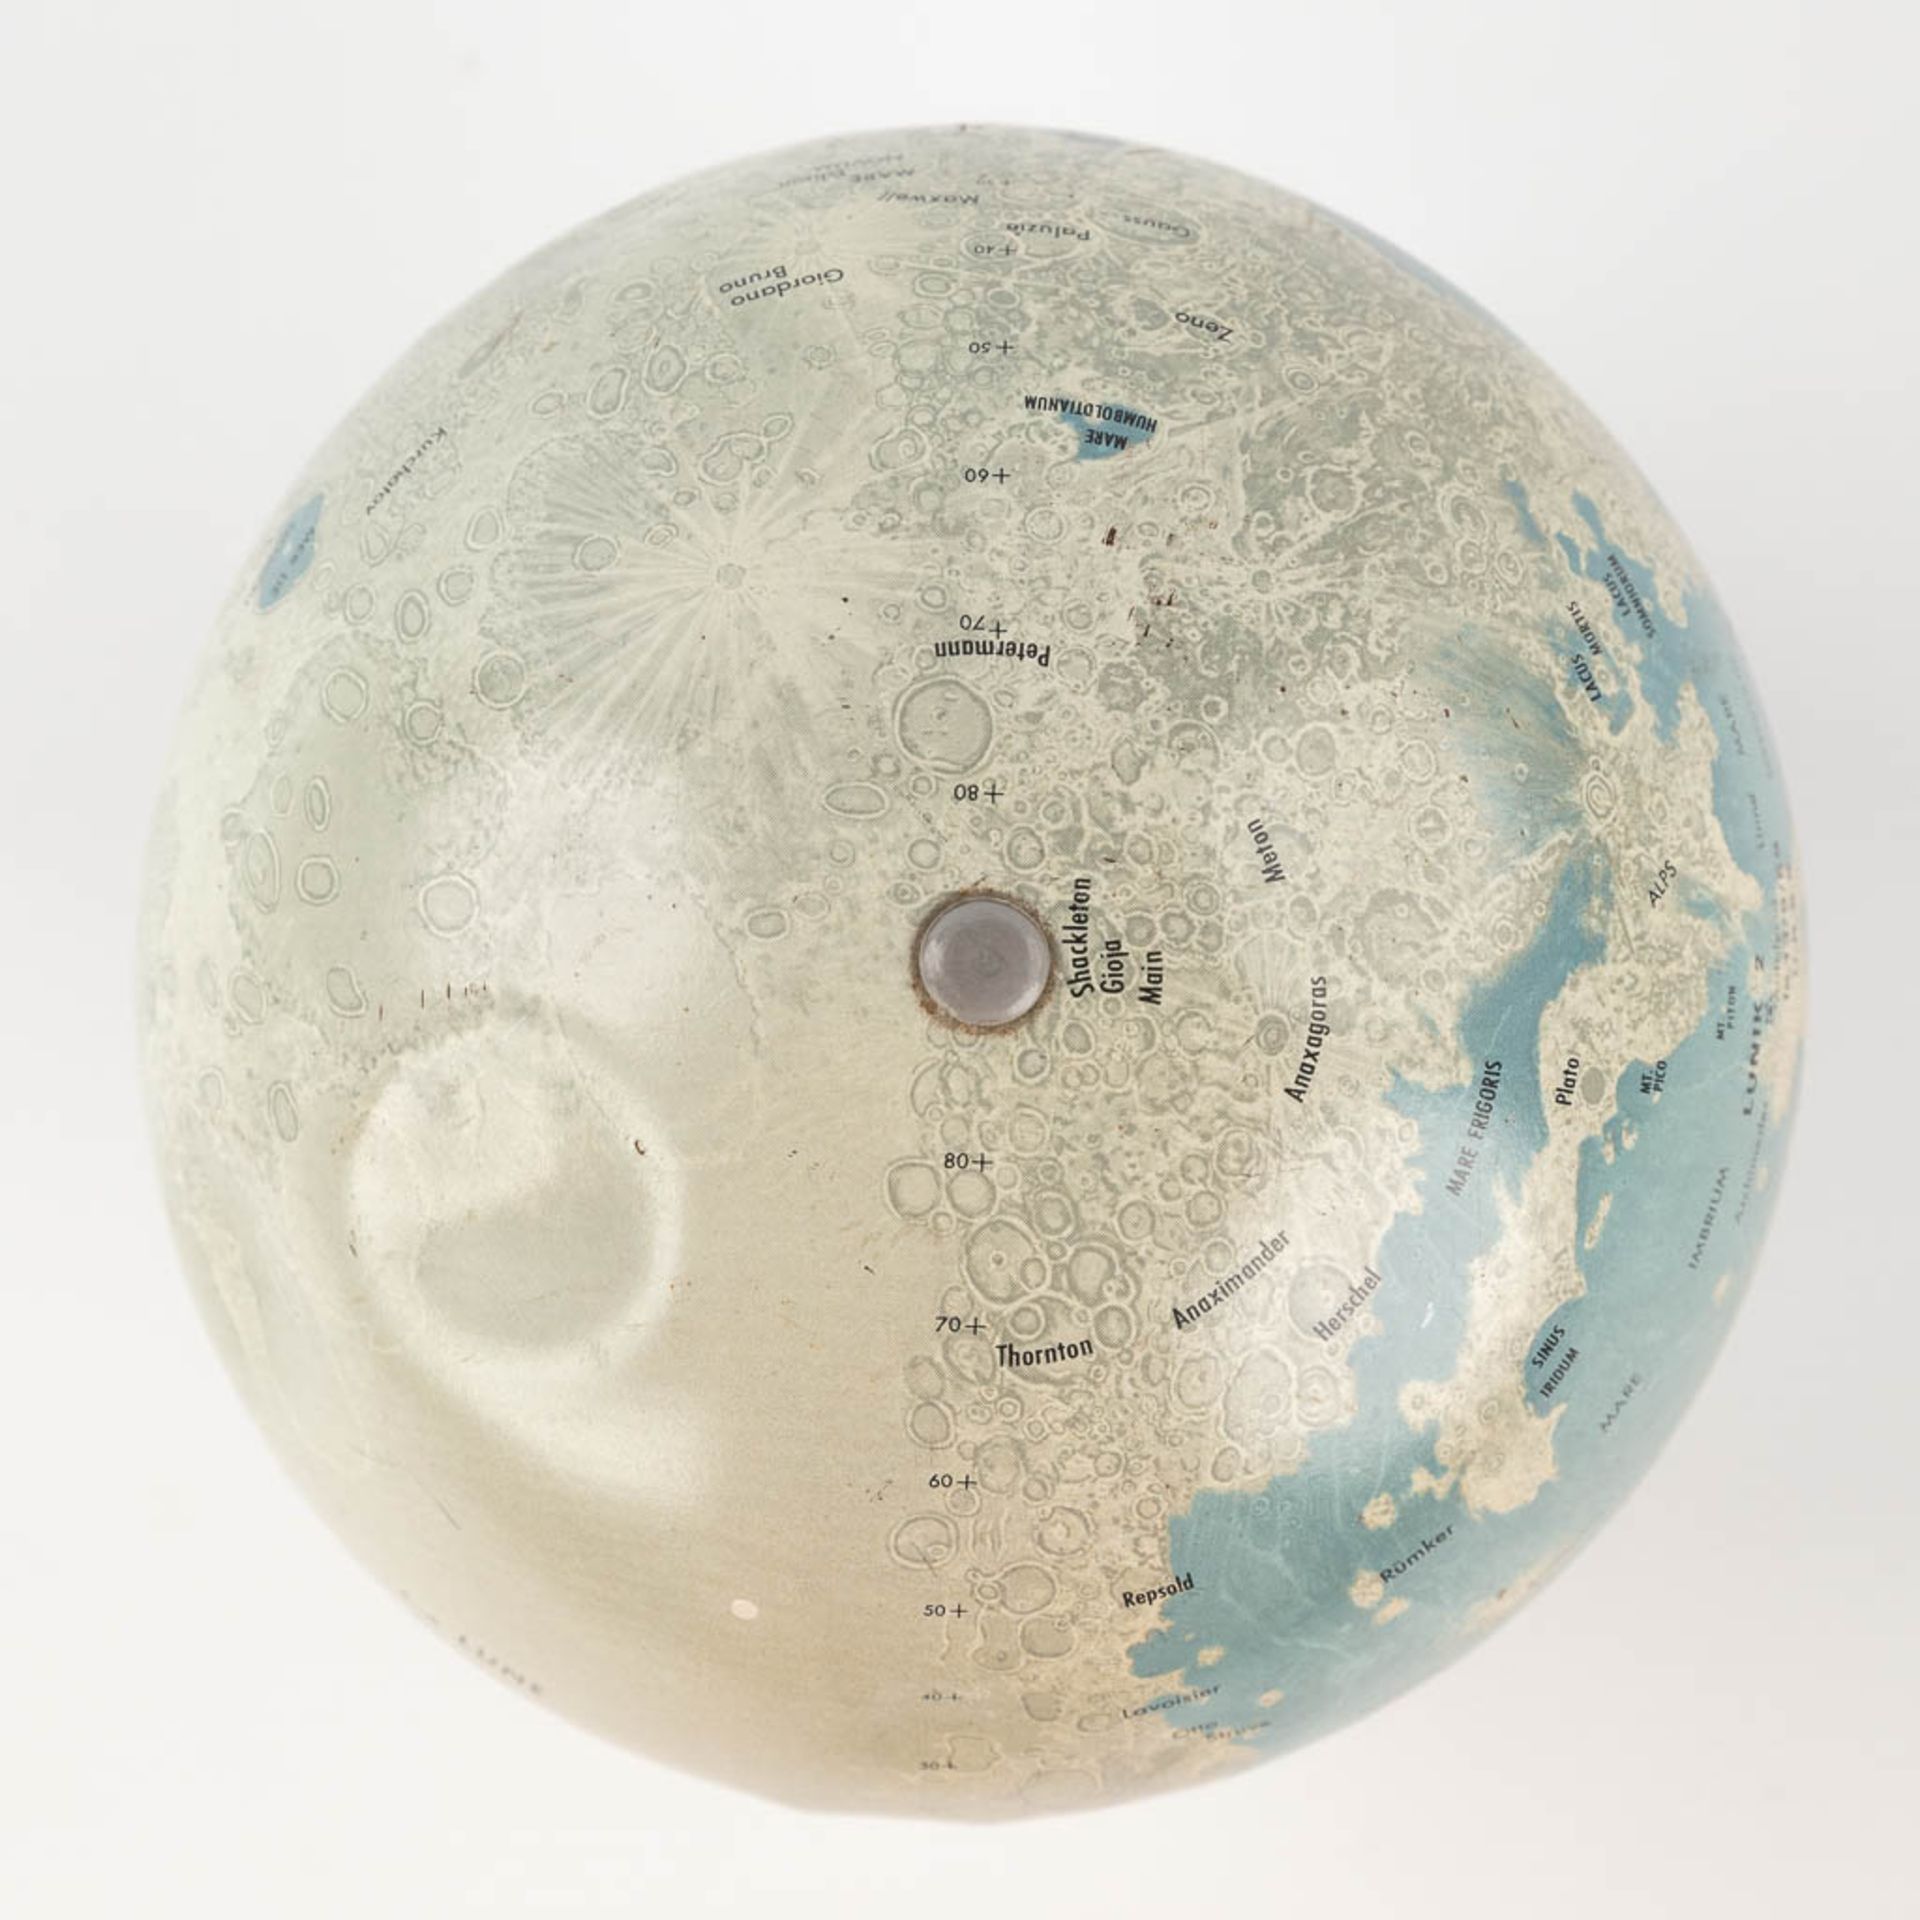 The earth and the moon, a set of 2 globes, circa 1960. (H: 42 x D: 30 cm) - Image 17 of 18